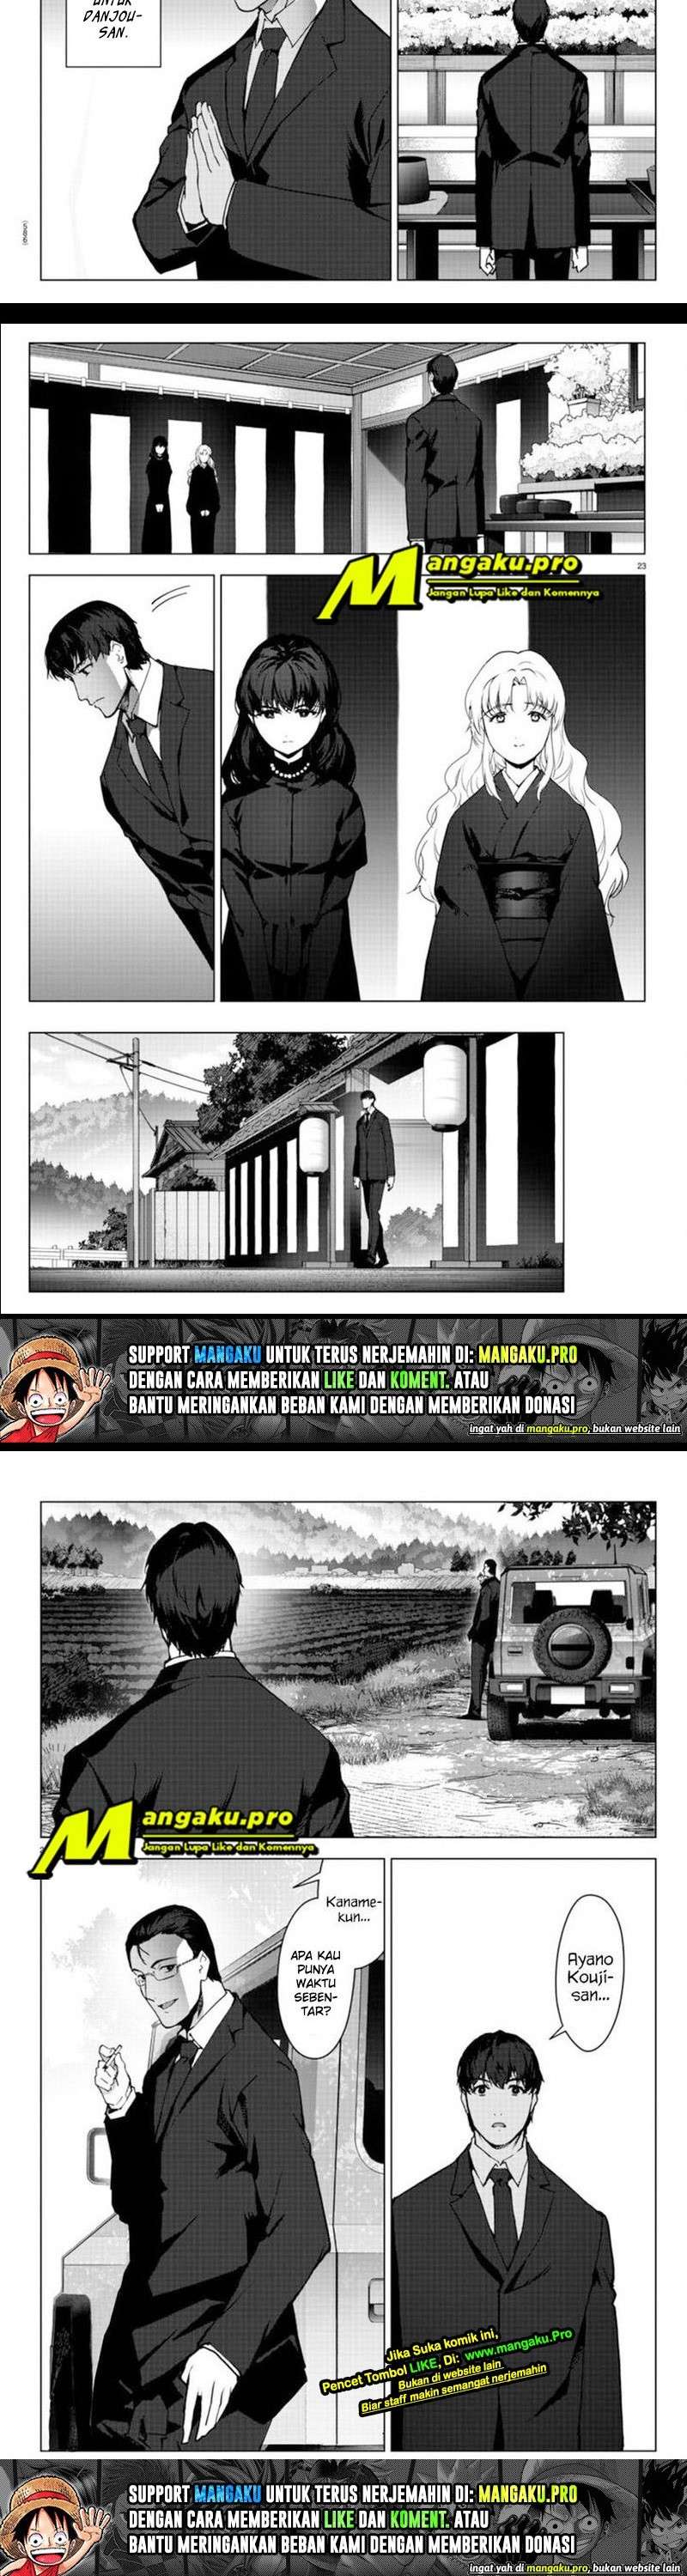 Darwin’s Game Chapter 94-2